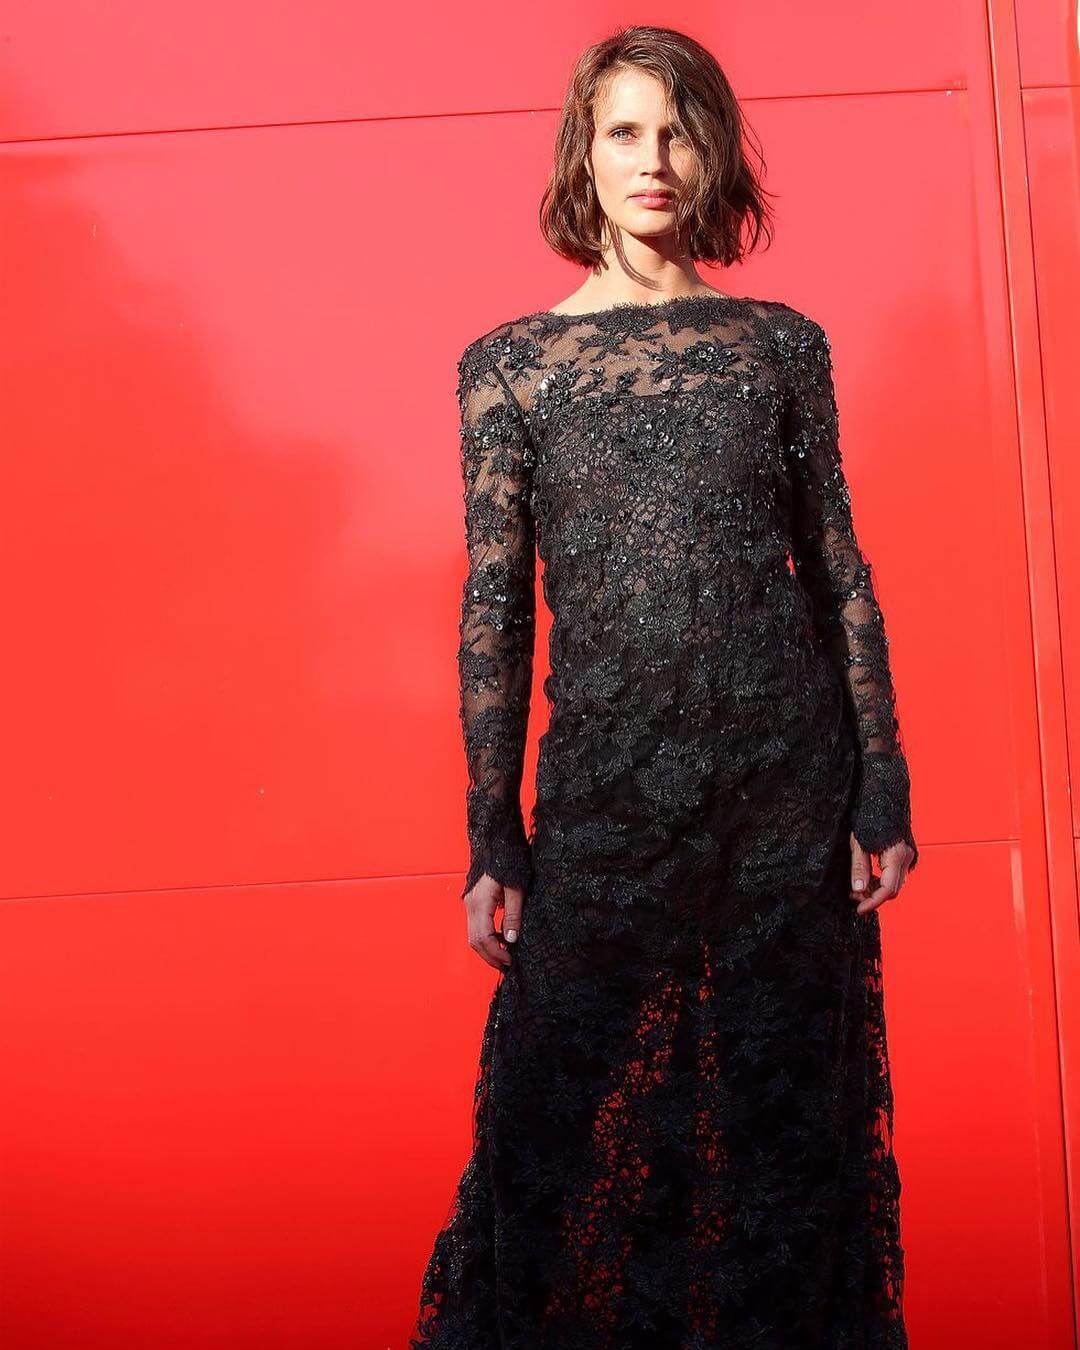 Marine Vacth  All Black Embellished  Embroidered Dress In Venice Film Festival